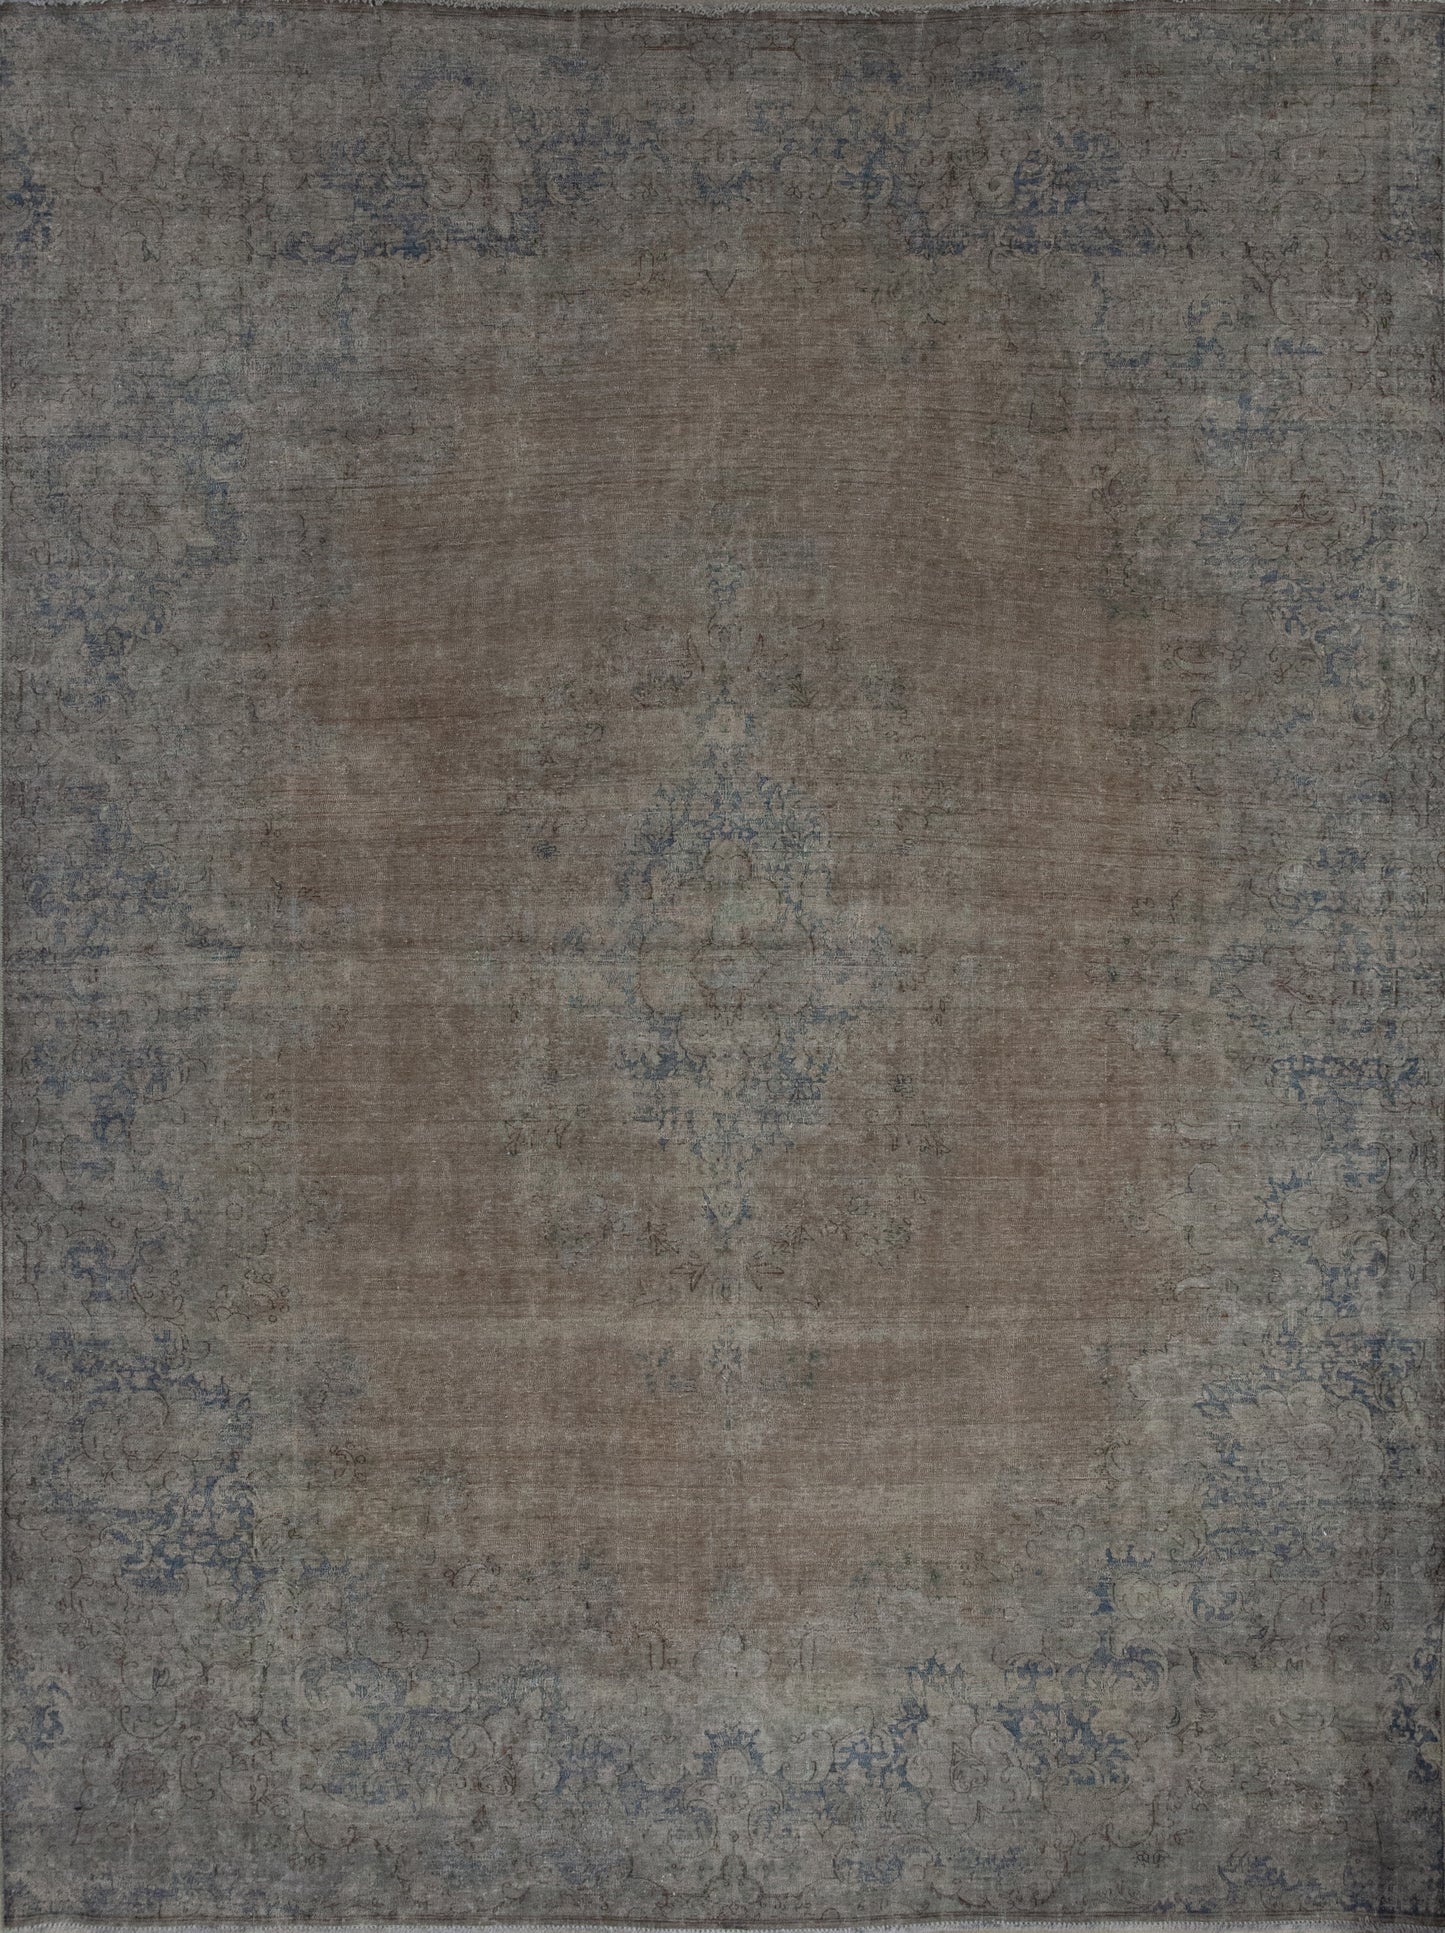 Reveal vintage rug comes in a distressed style.